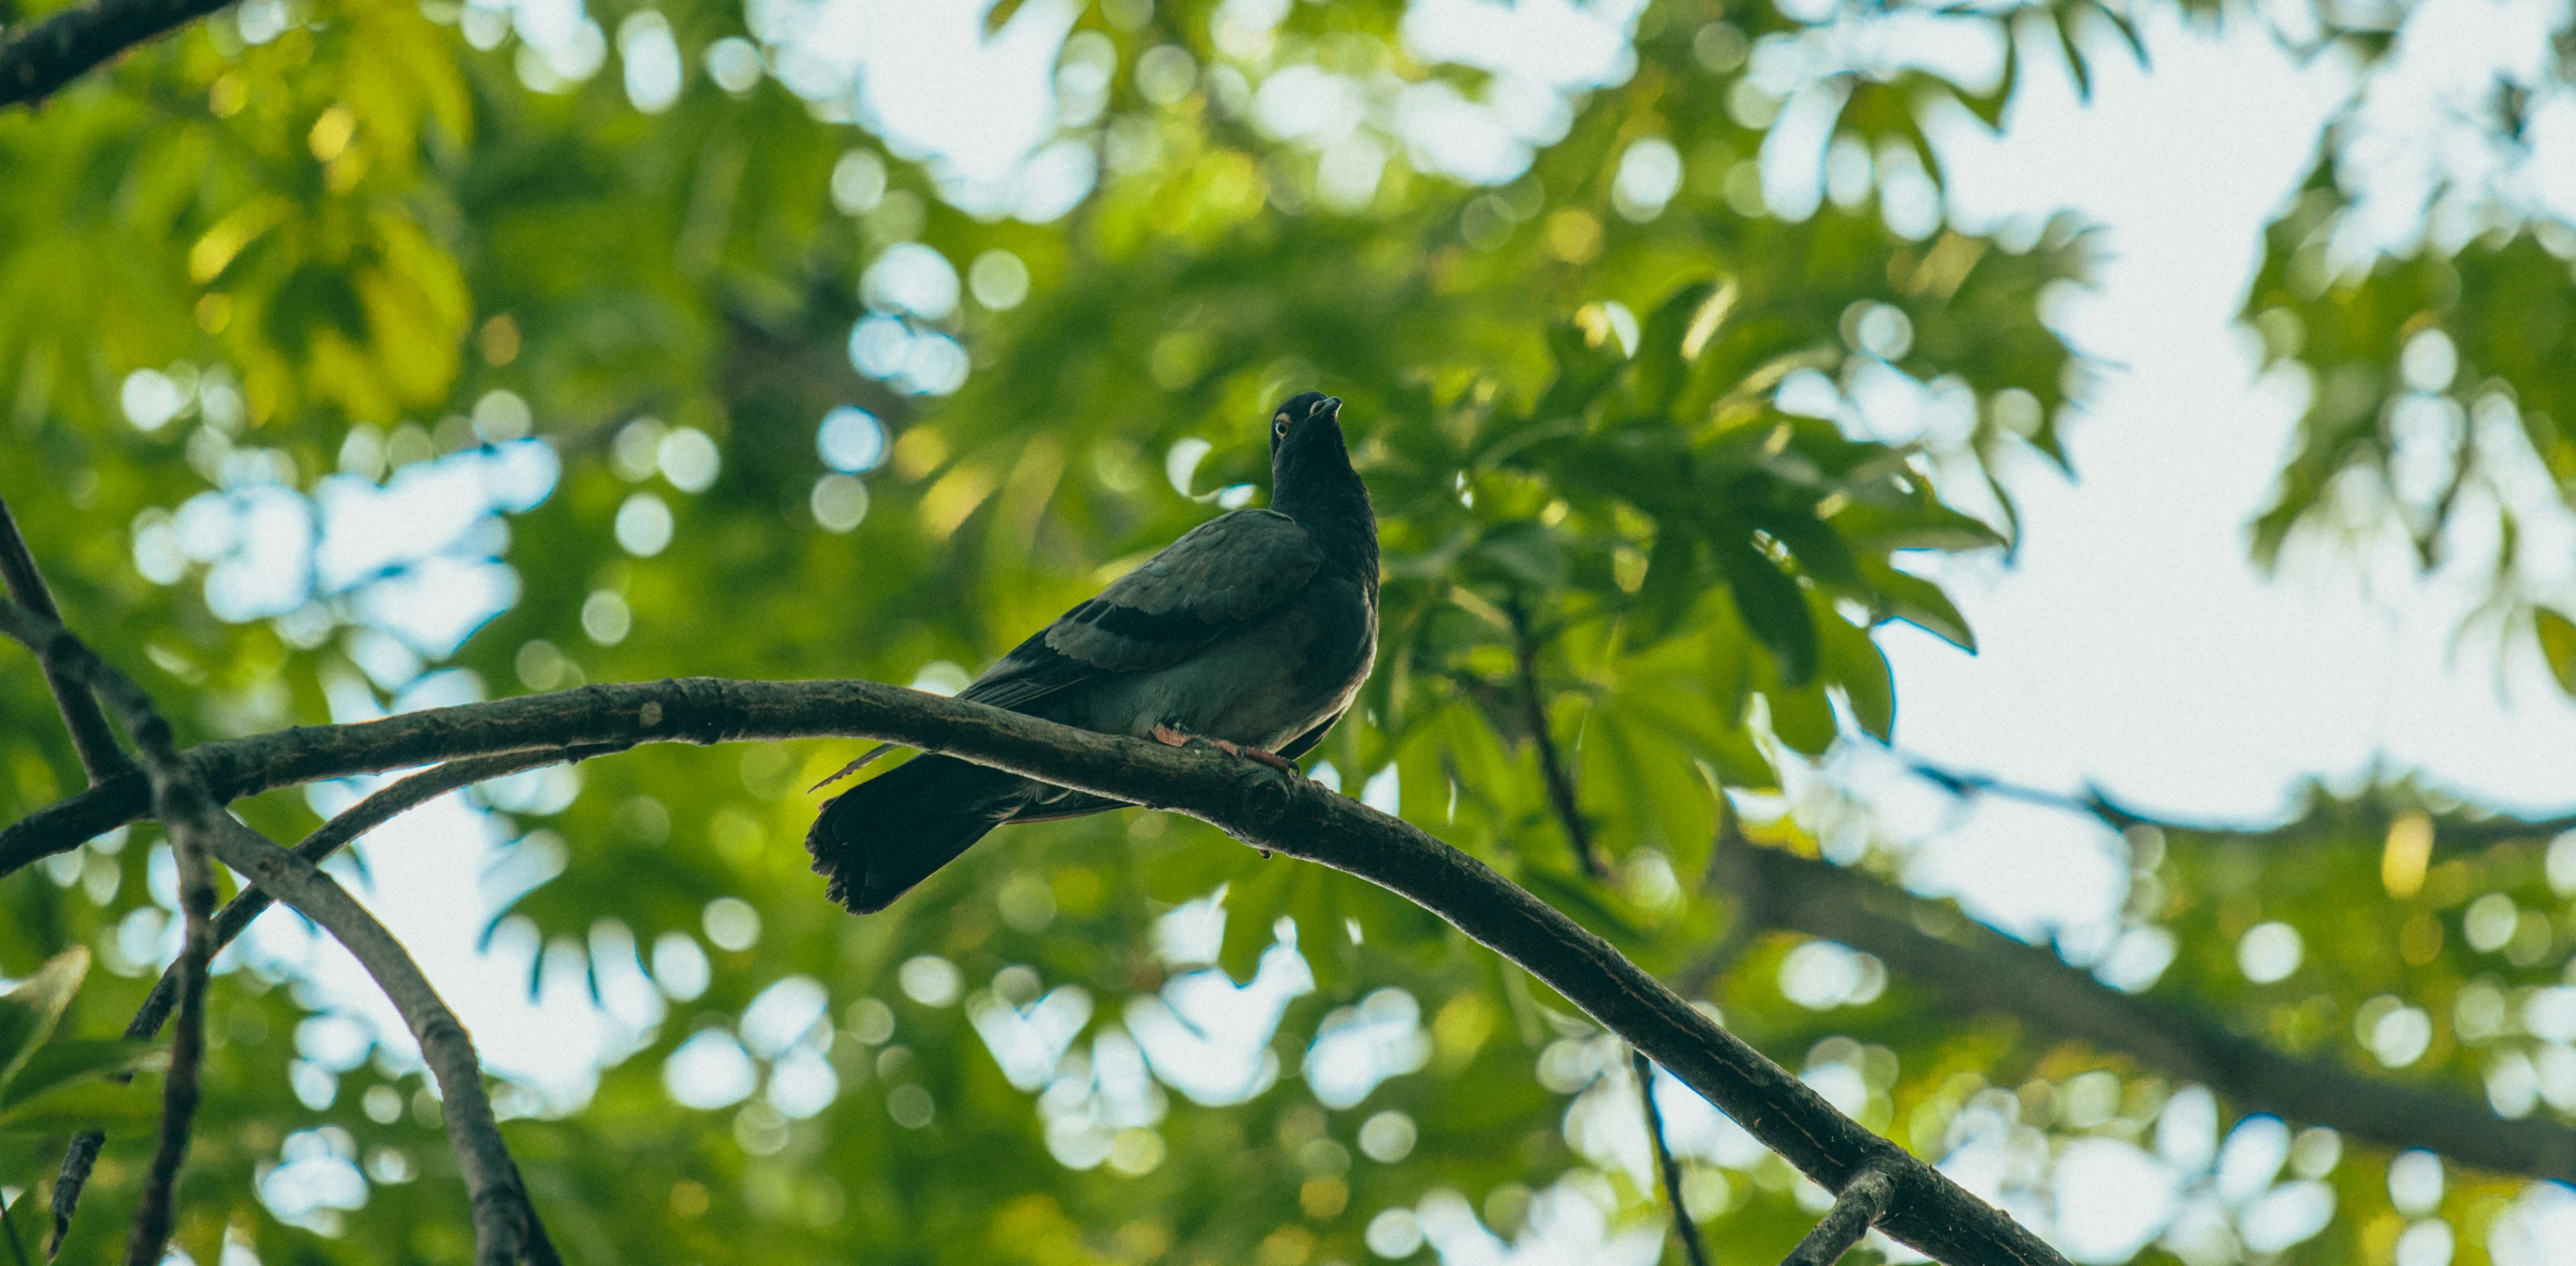 a small bird perched on a limb of a tree